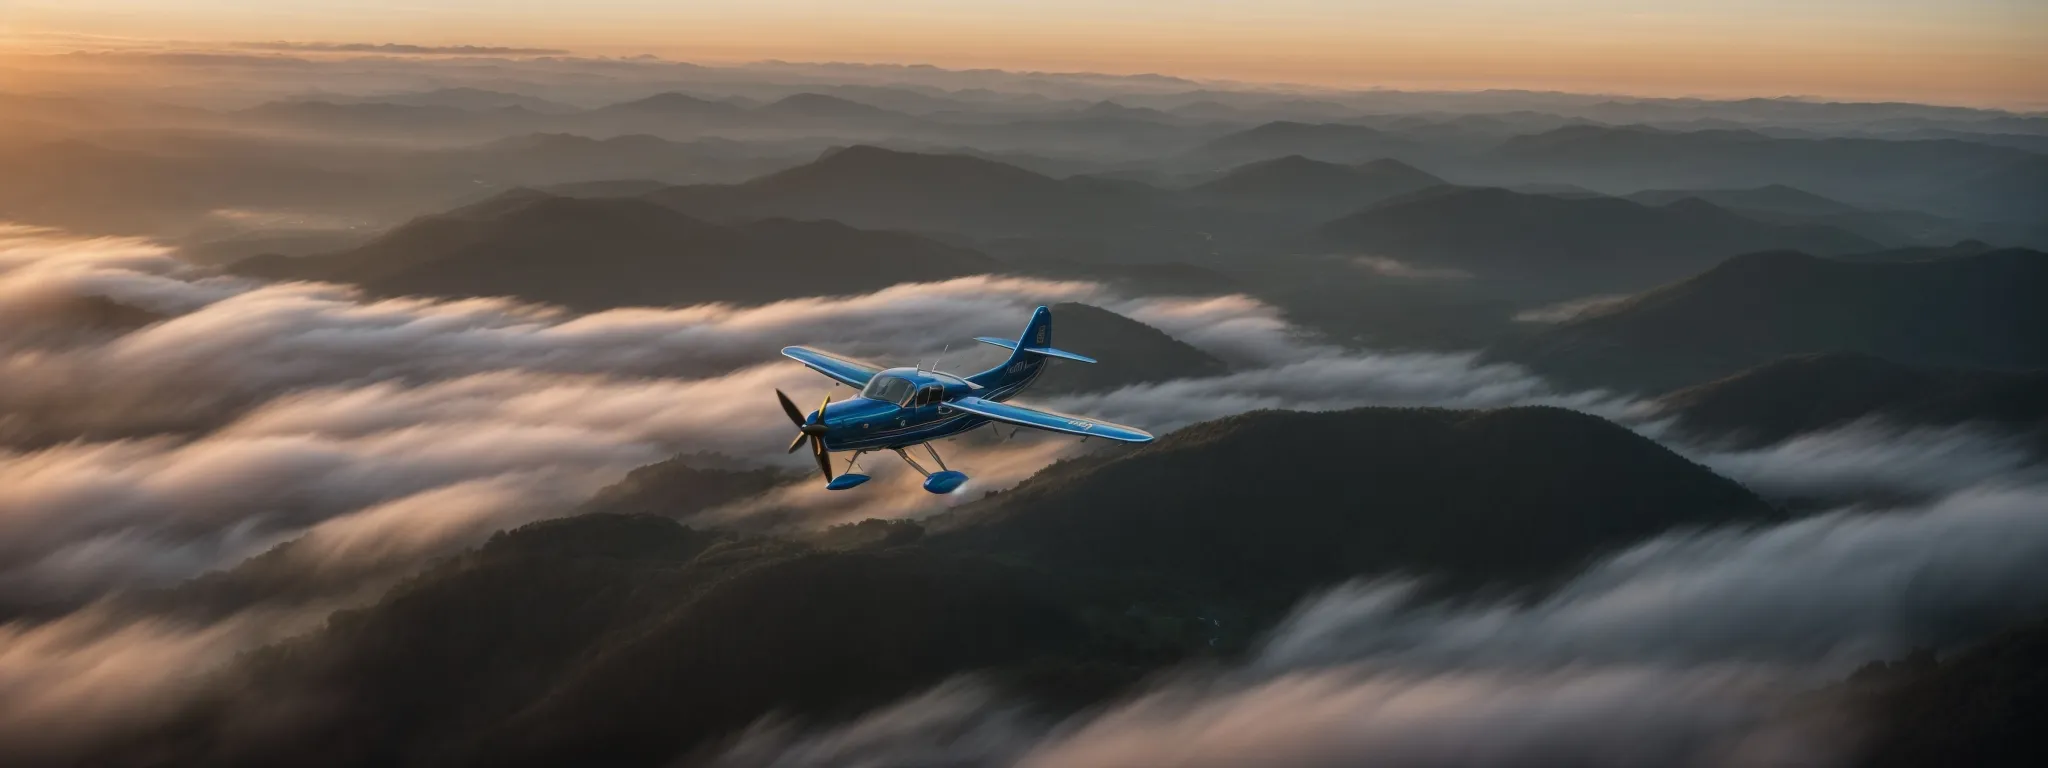 a small, single-engine aircraft takes flight at dawn, symbolizing the rise of an aviation company's local presence through specialized seo strategies.